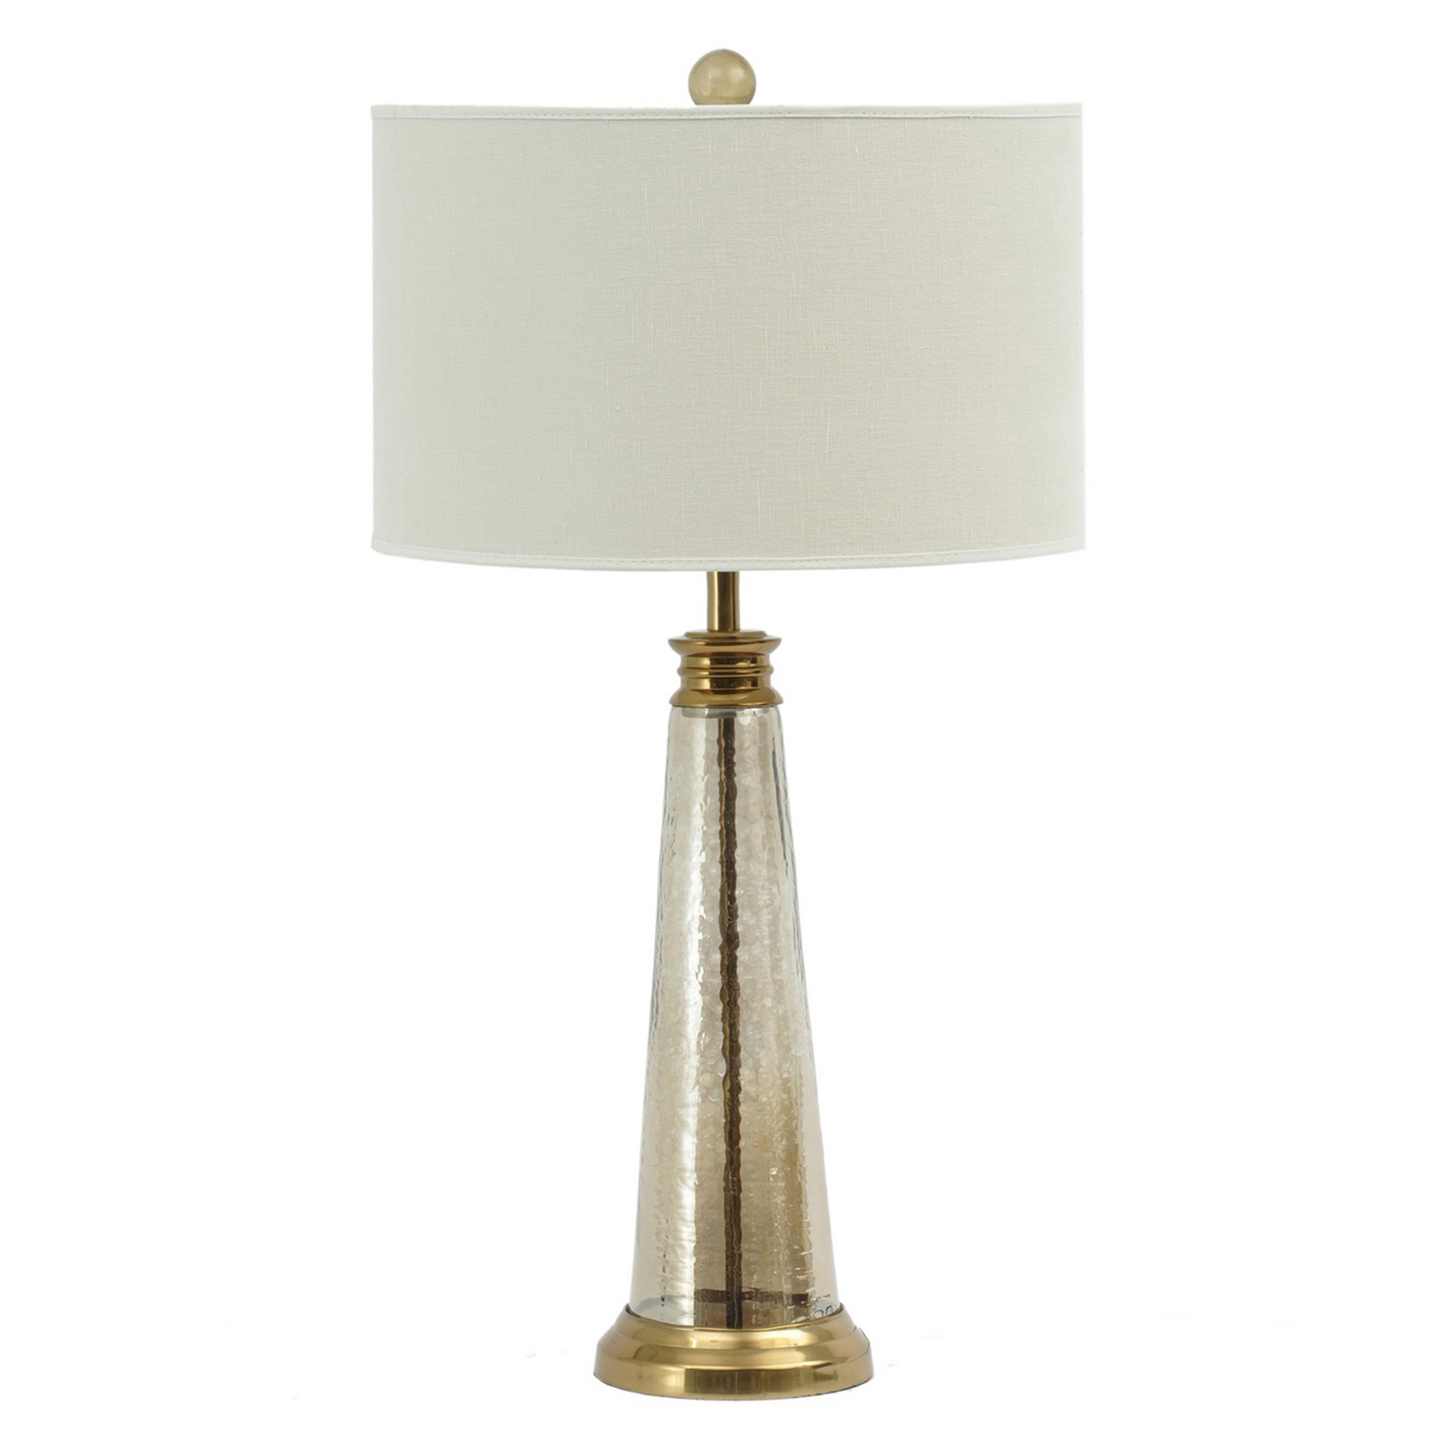 Regal Antique Brass and Glass Table Lamp